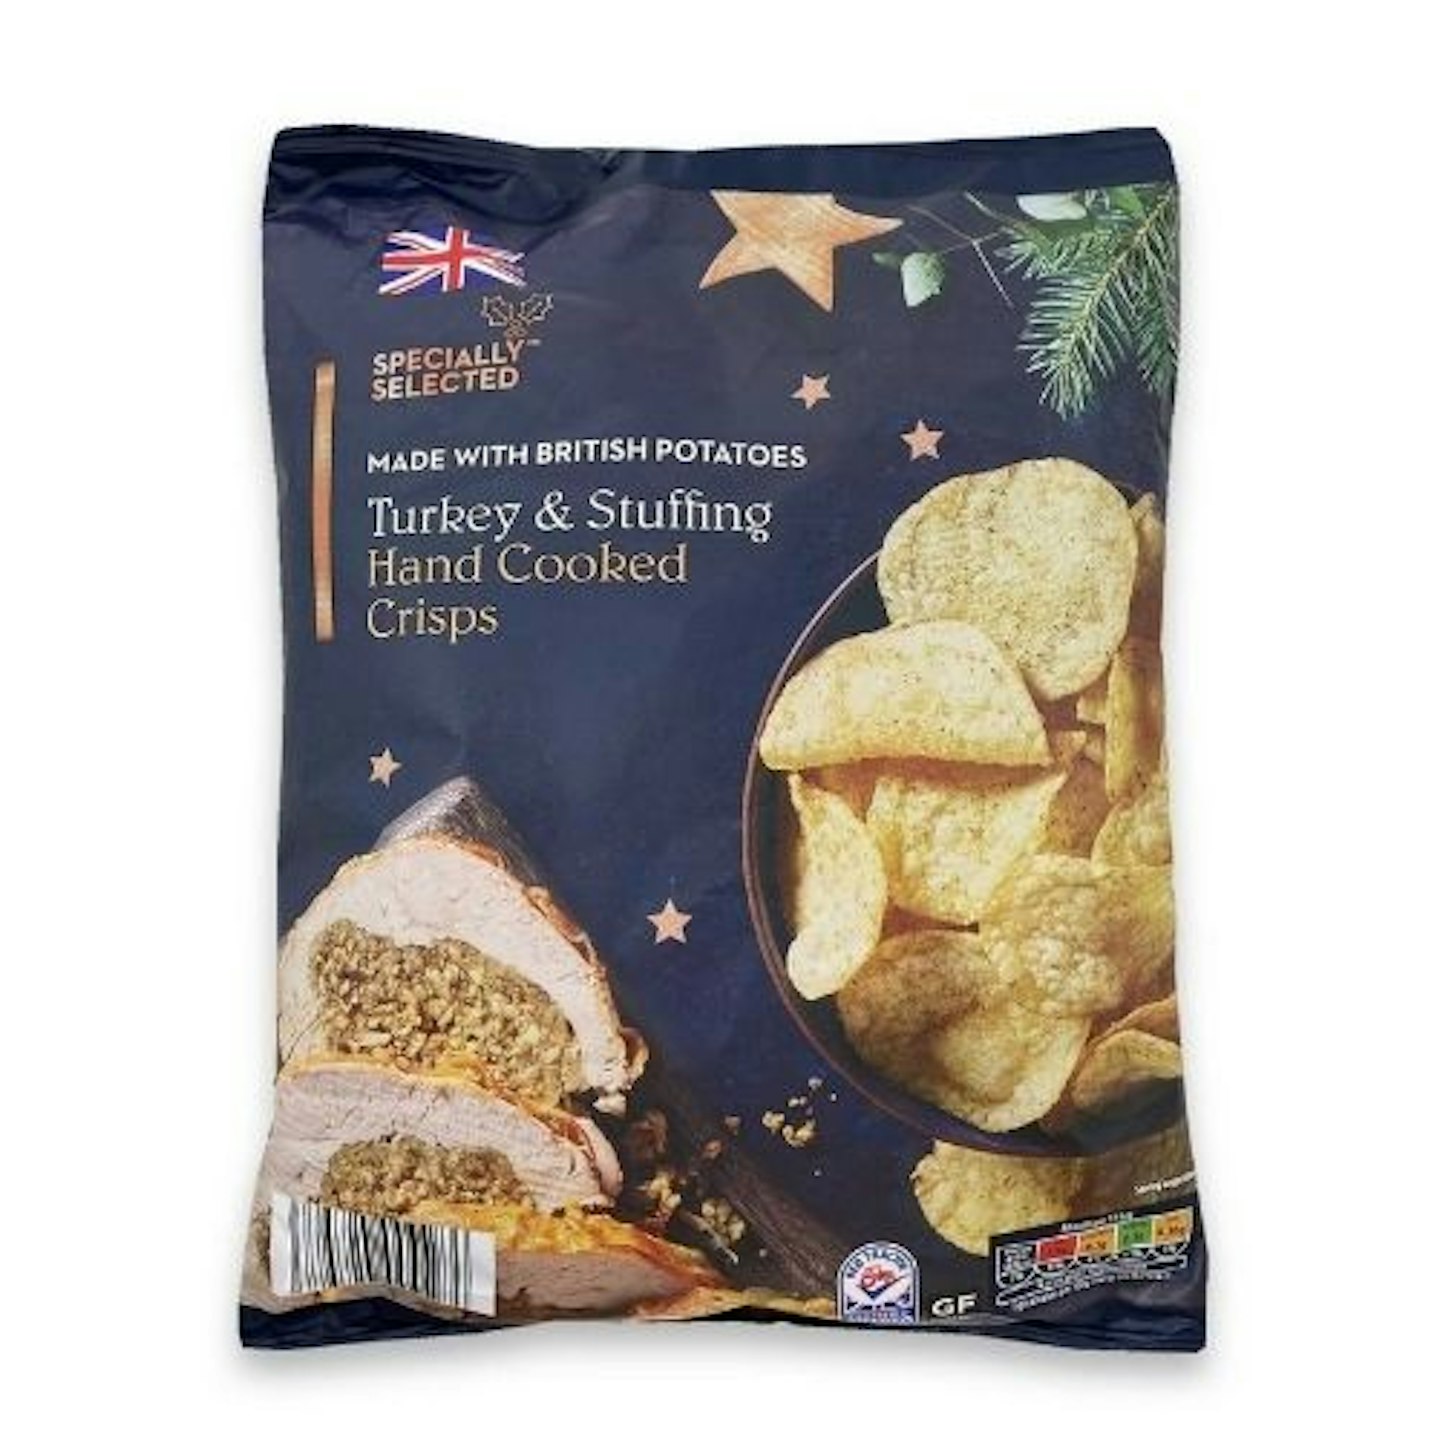 Specially Selected Turkey & Stuffing Hand Cooked Crisps